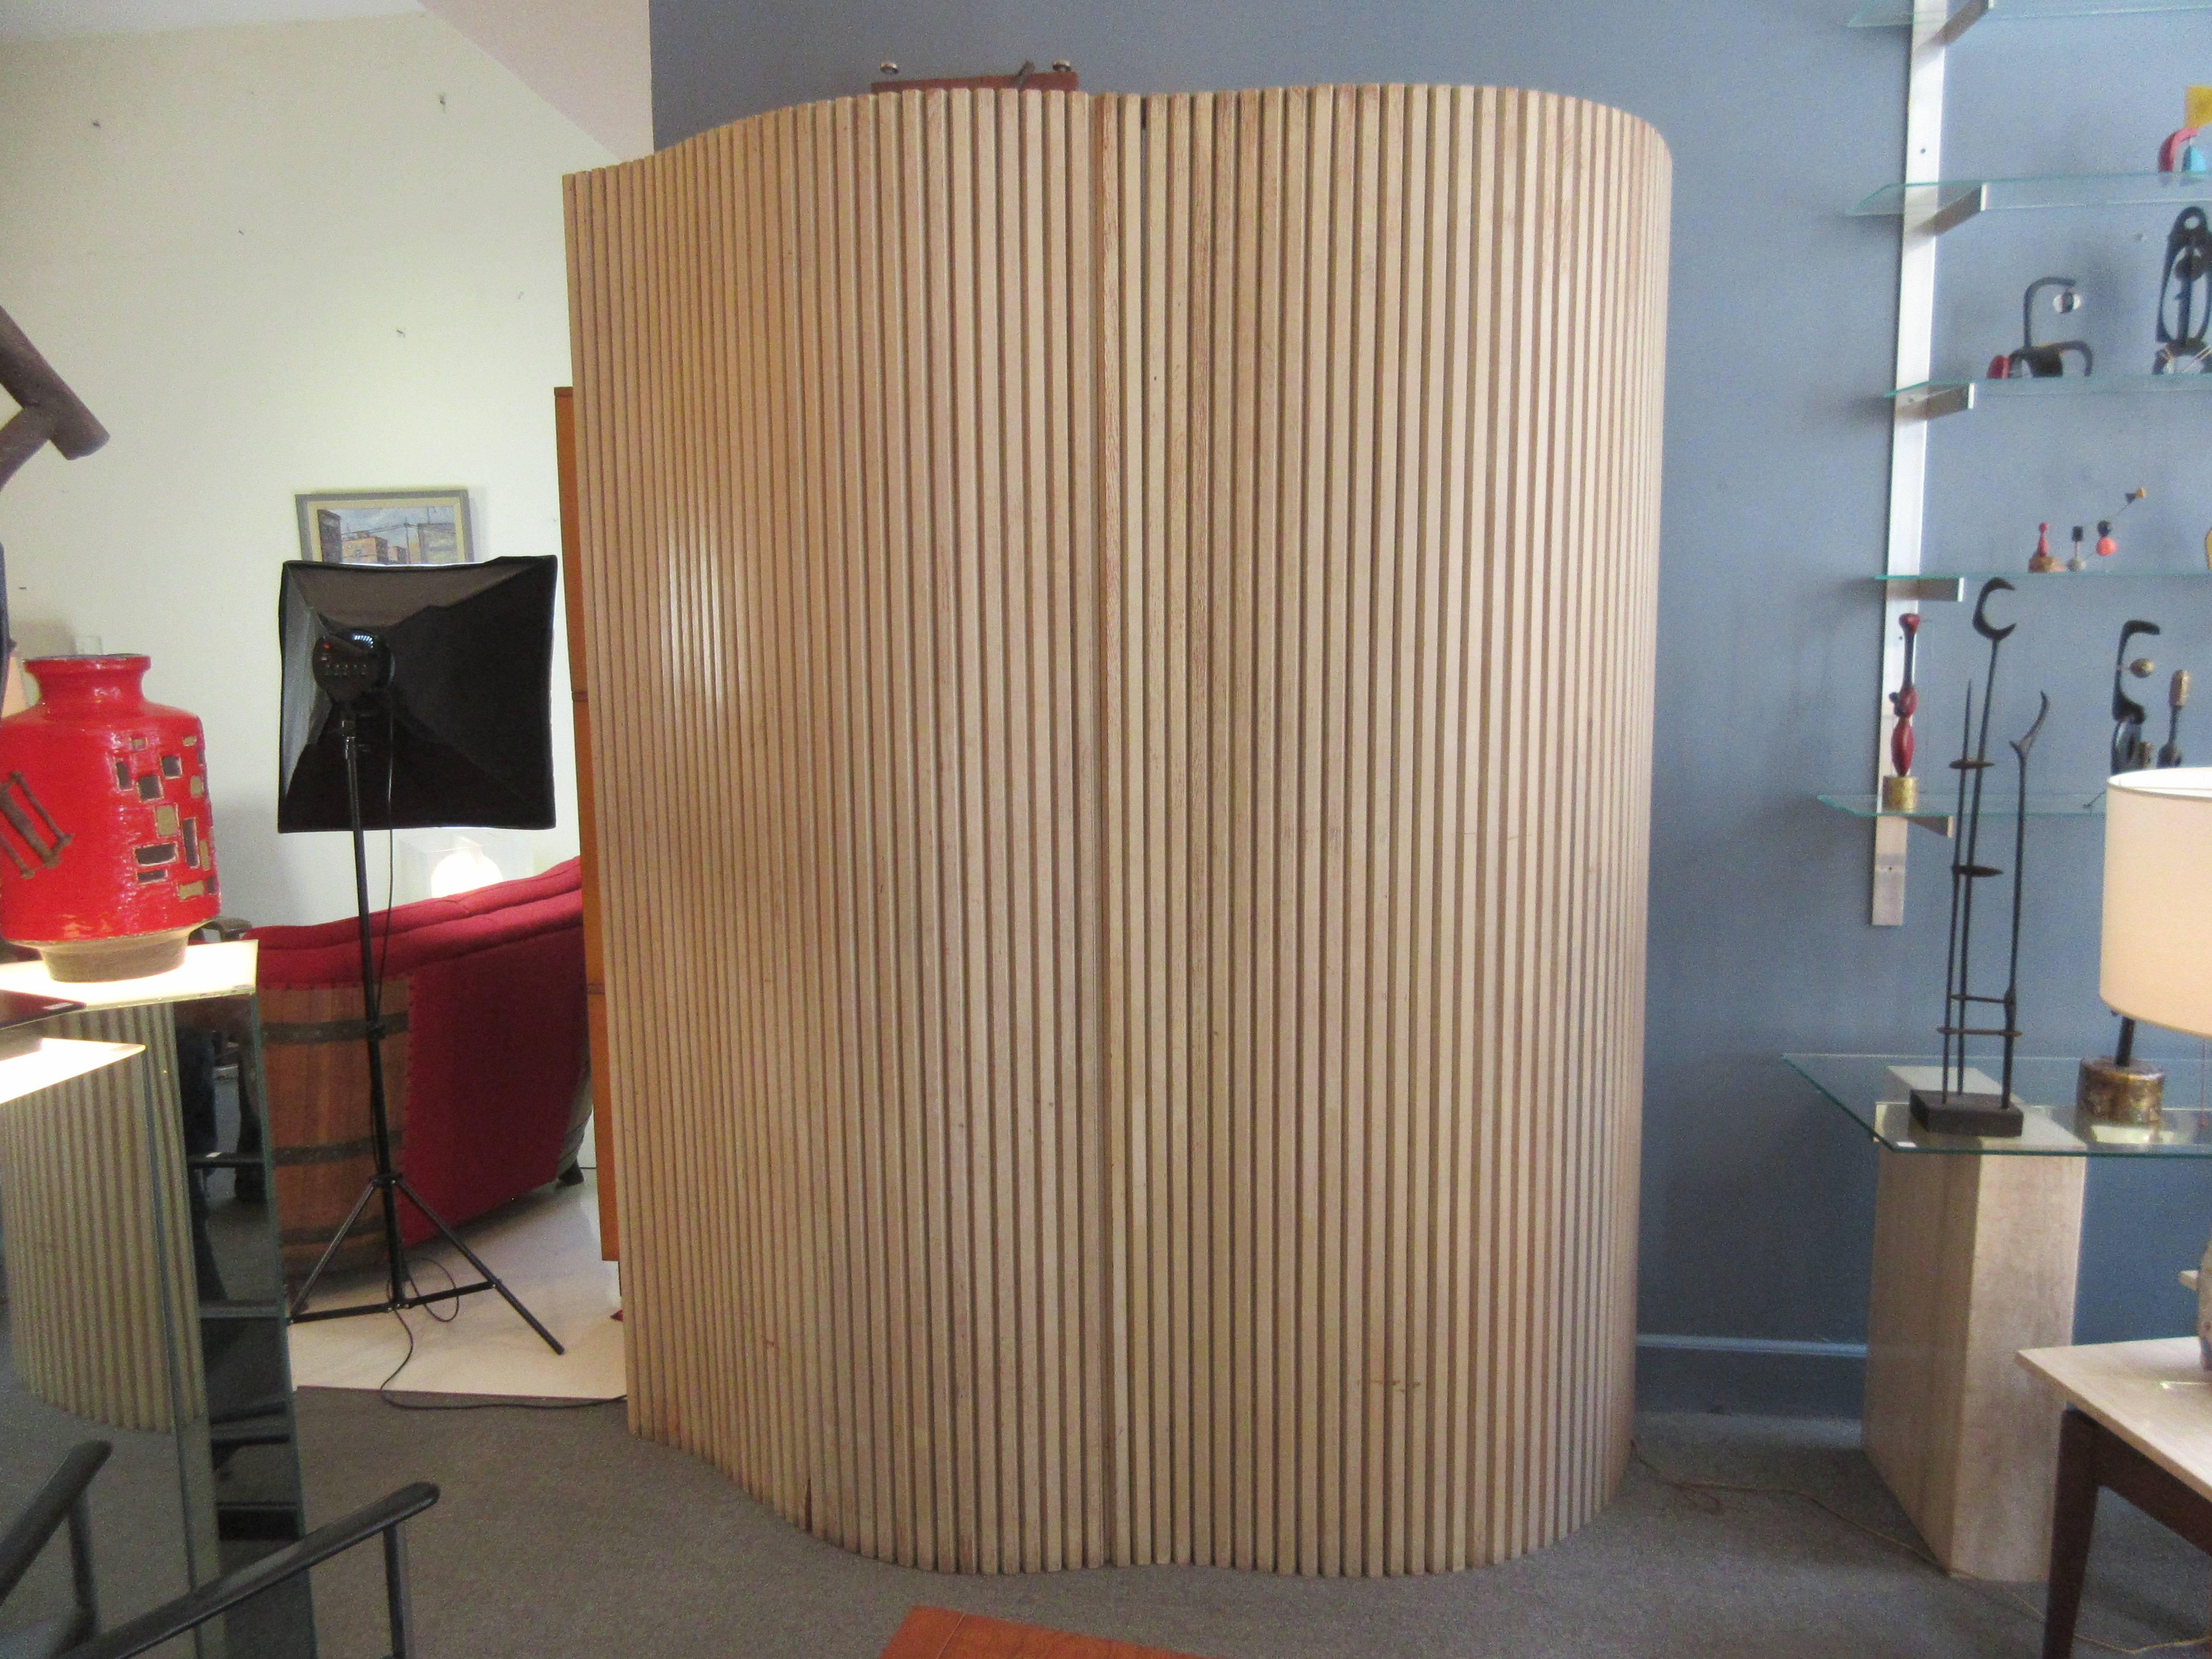 Screen or room divider in pickled oak composed of two pieces bolted together to form an undulated screen. Measures: 71 inches long, 87 high and a wave of 22 inches in depth.